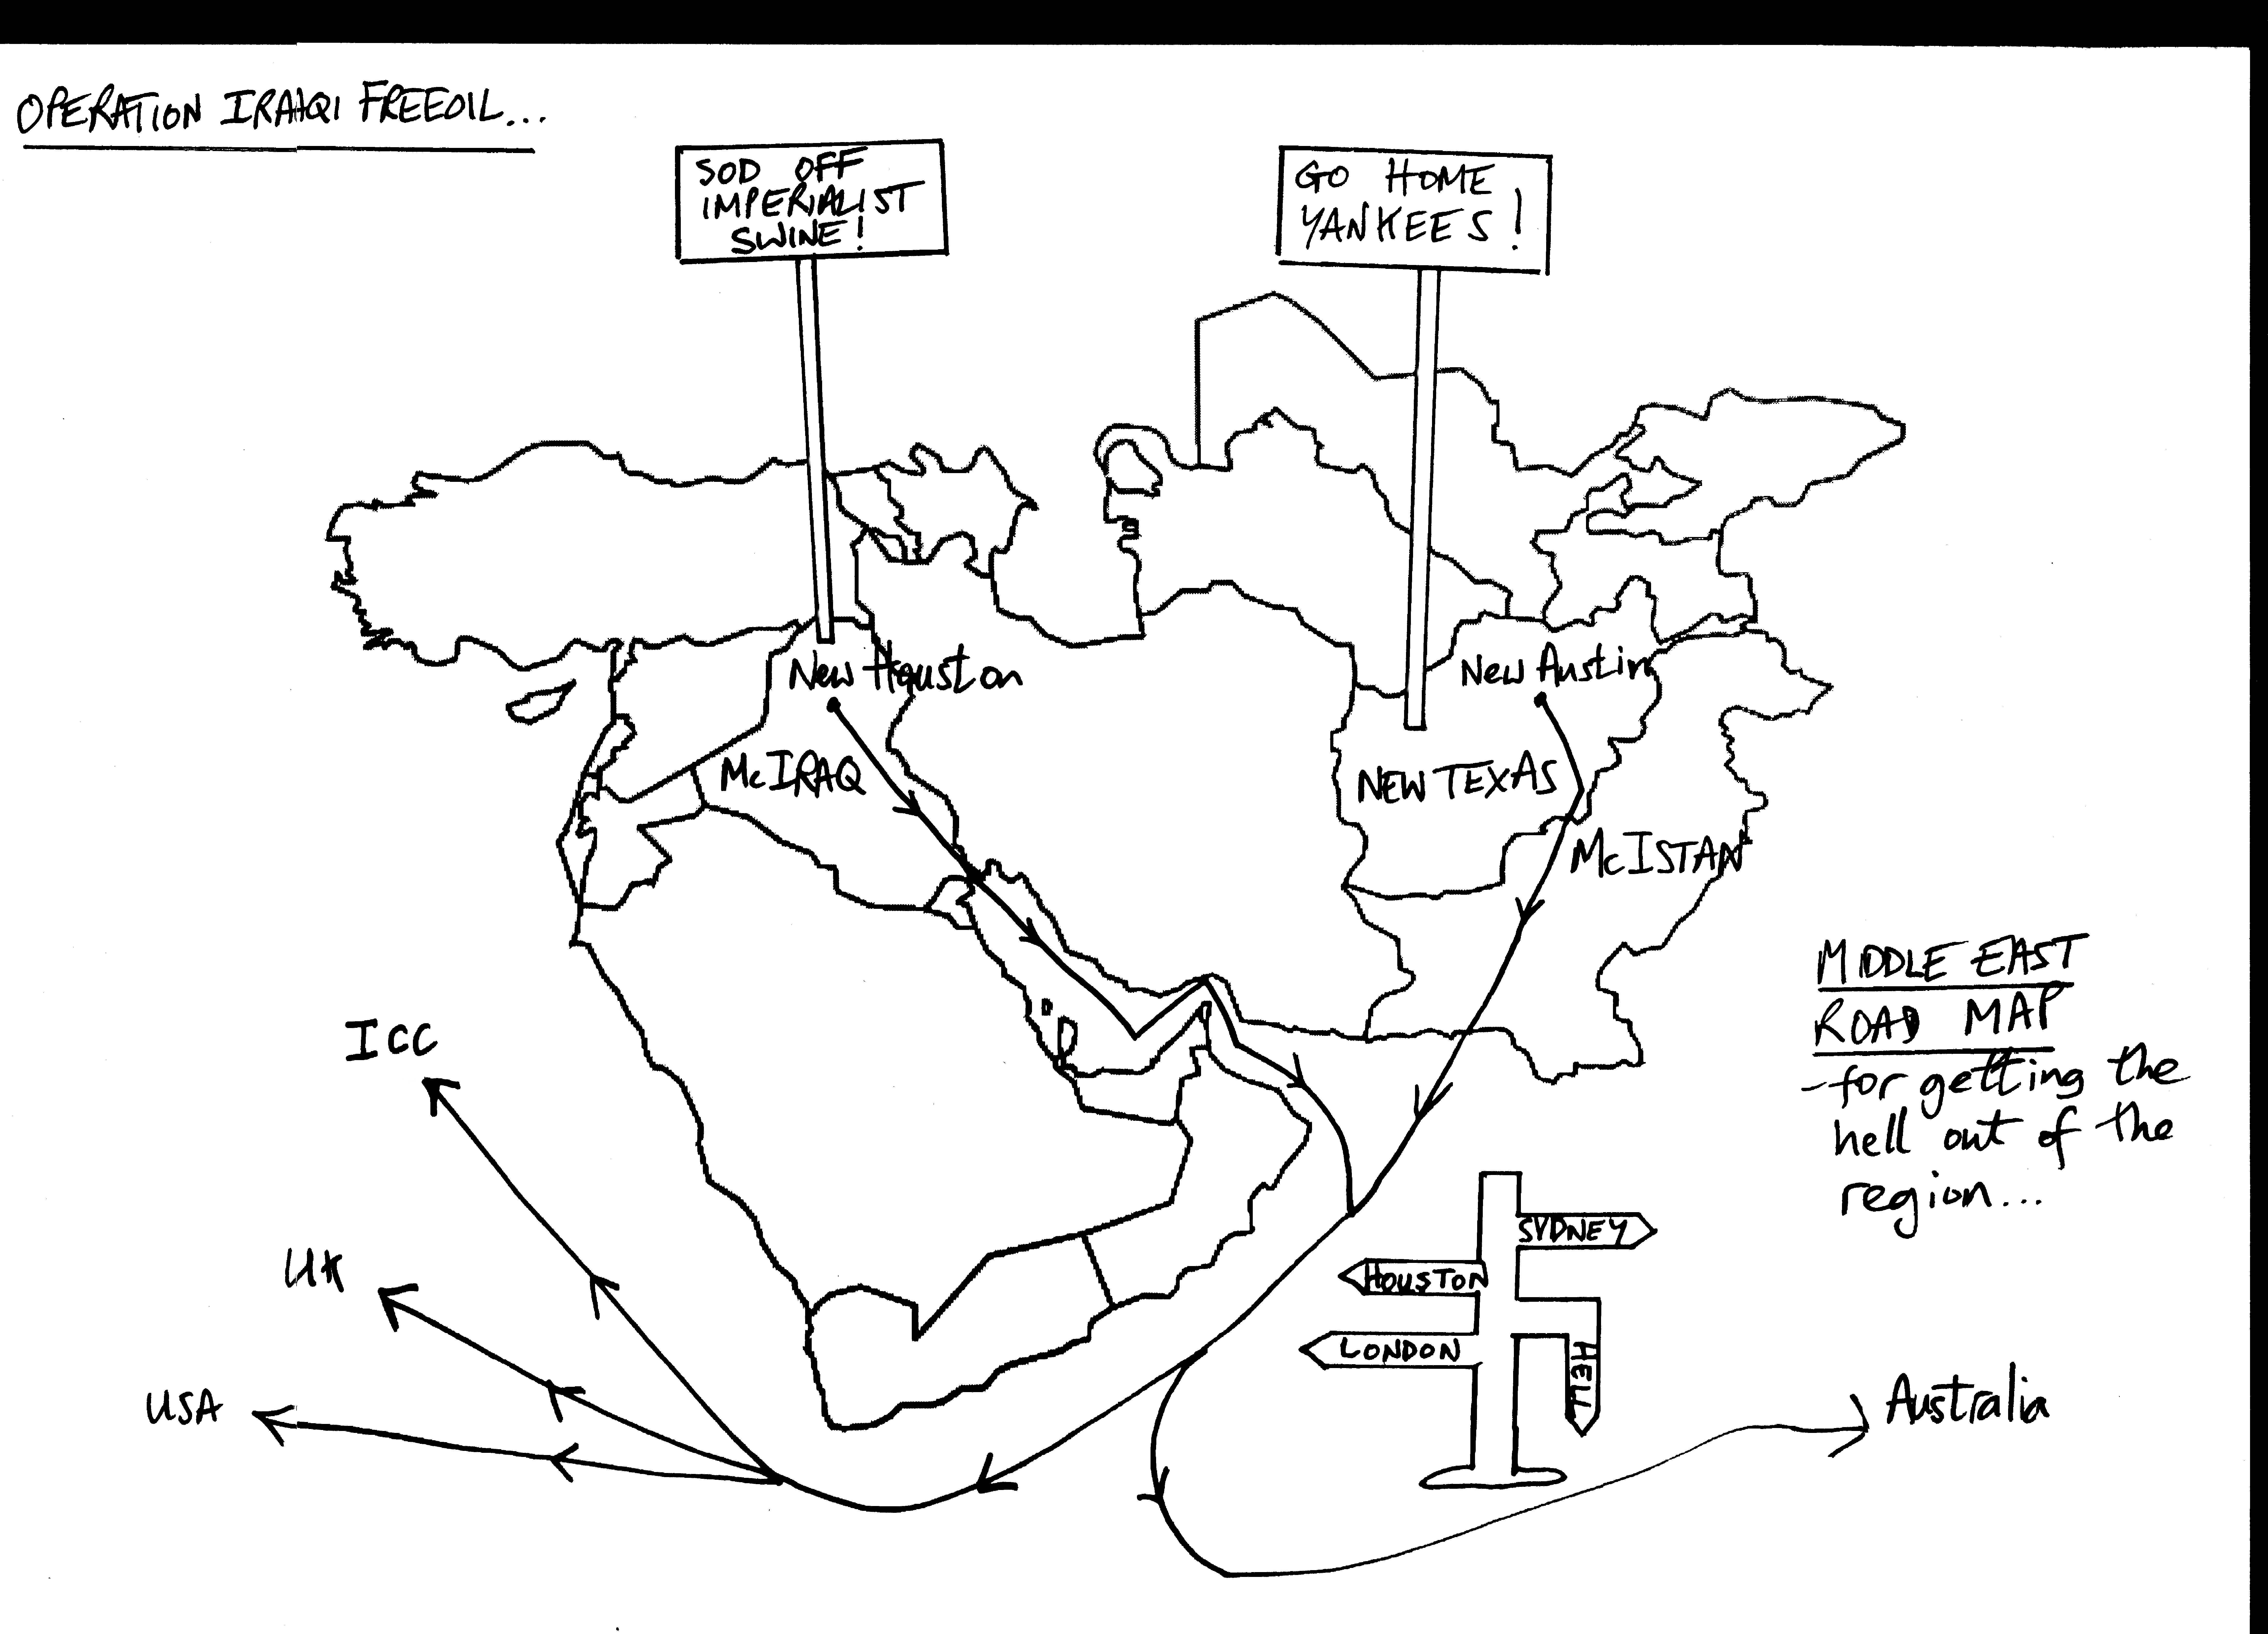 Middle East Road Map - Cartoon